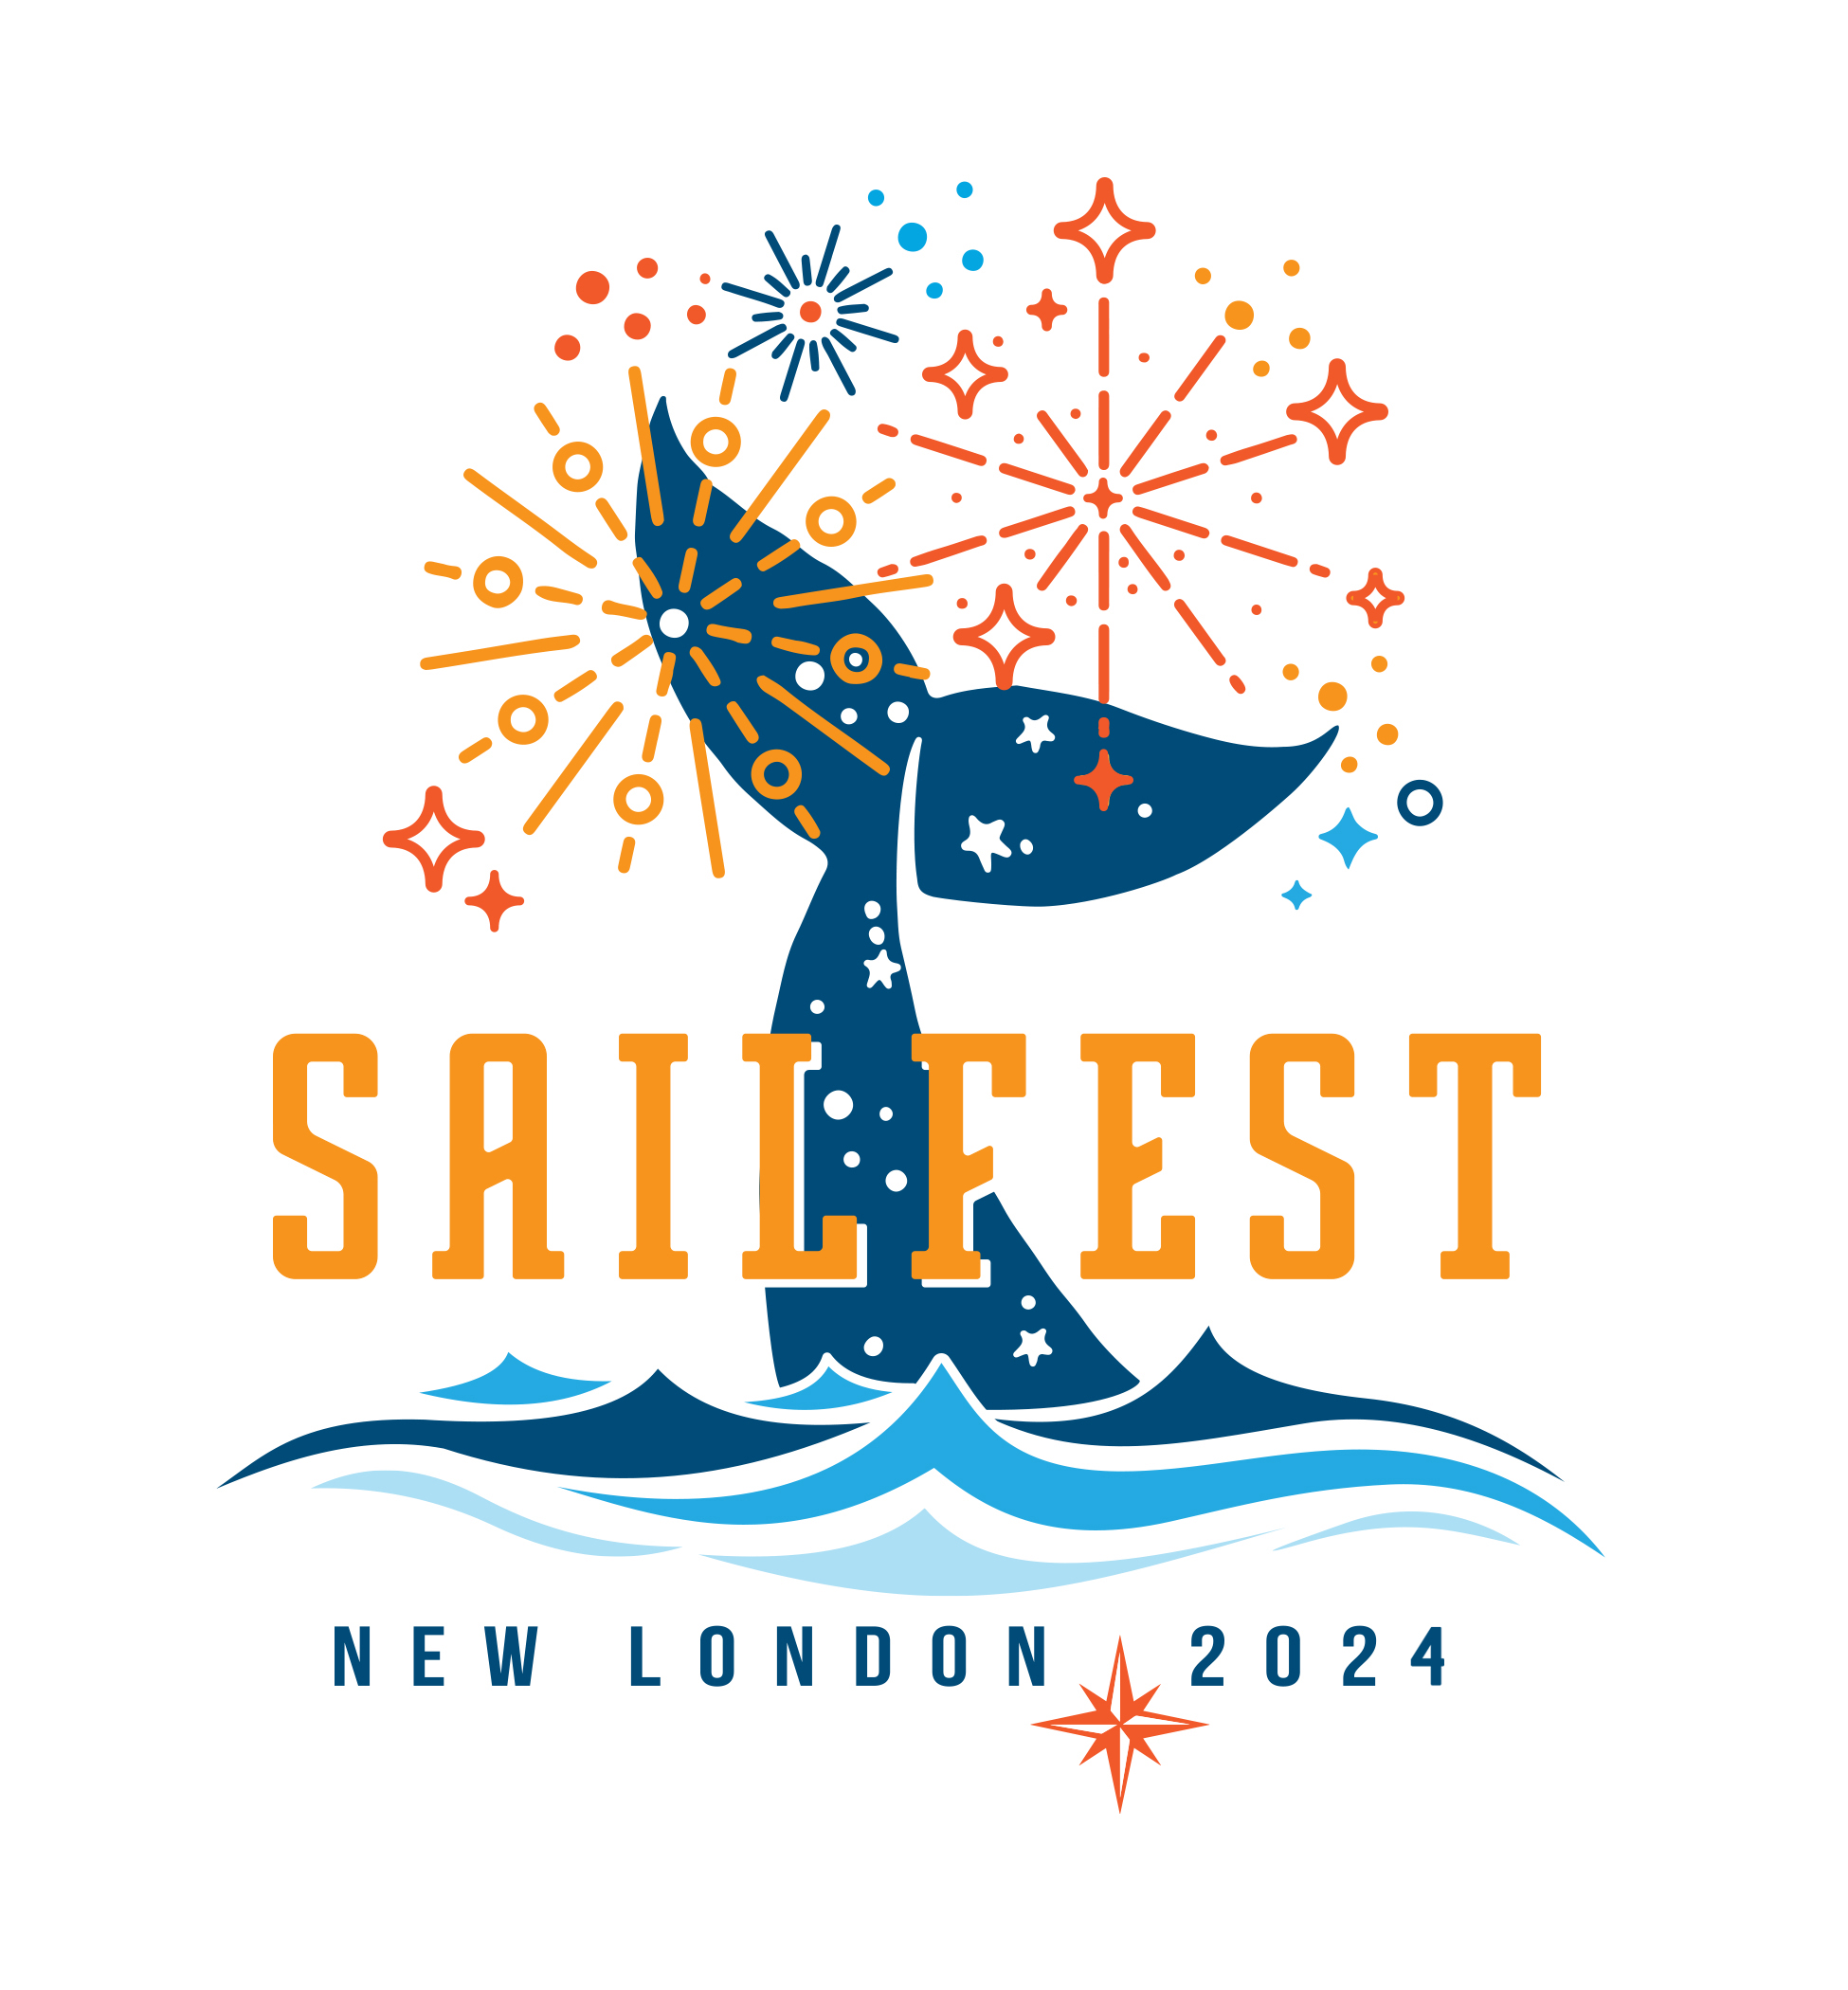 Annual Sailfest Celebration Weekend at New London Harbor